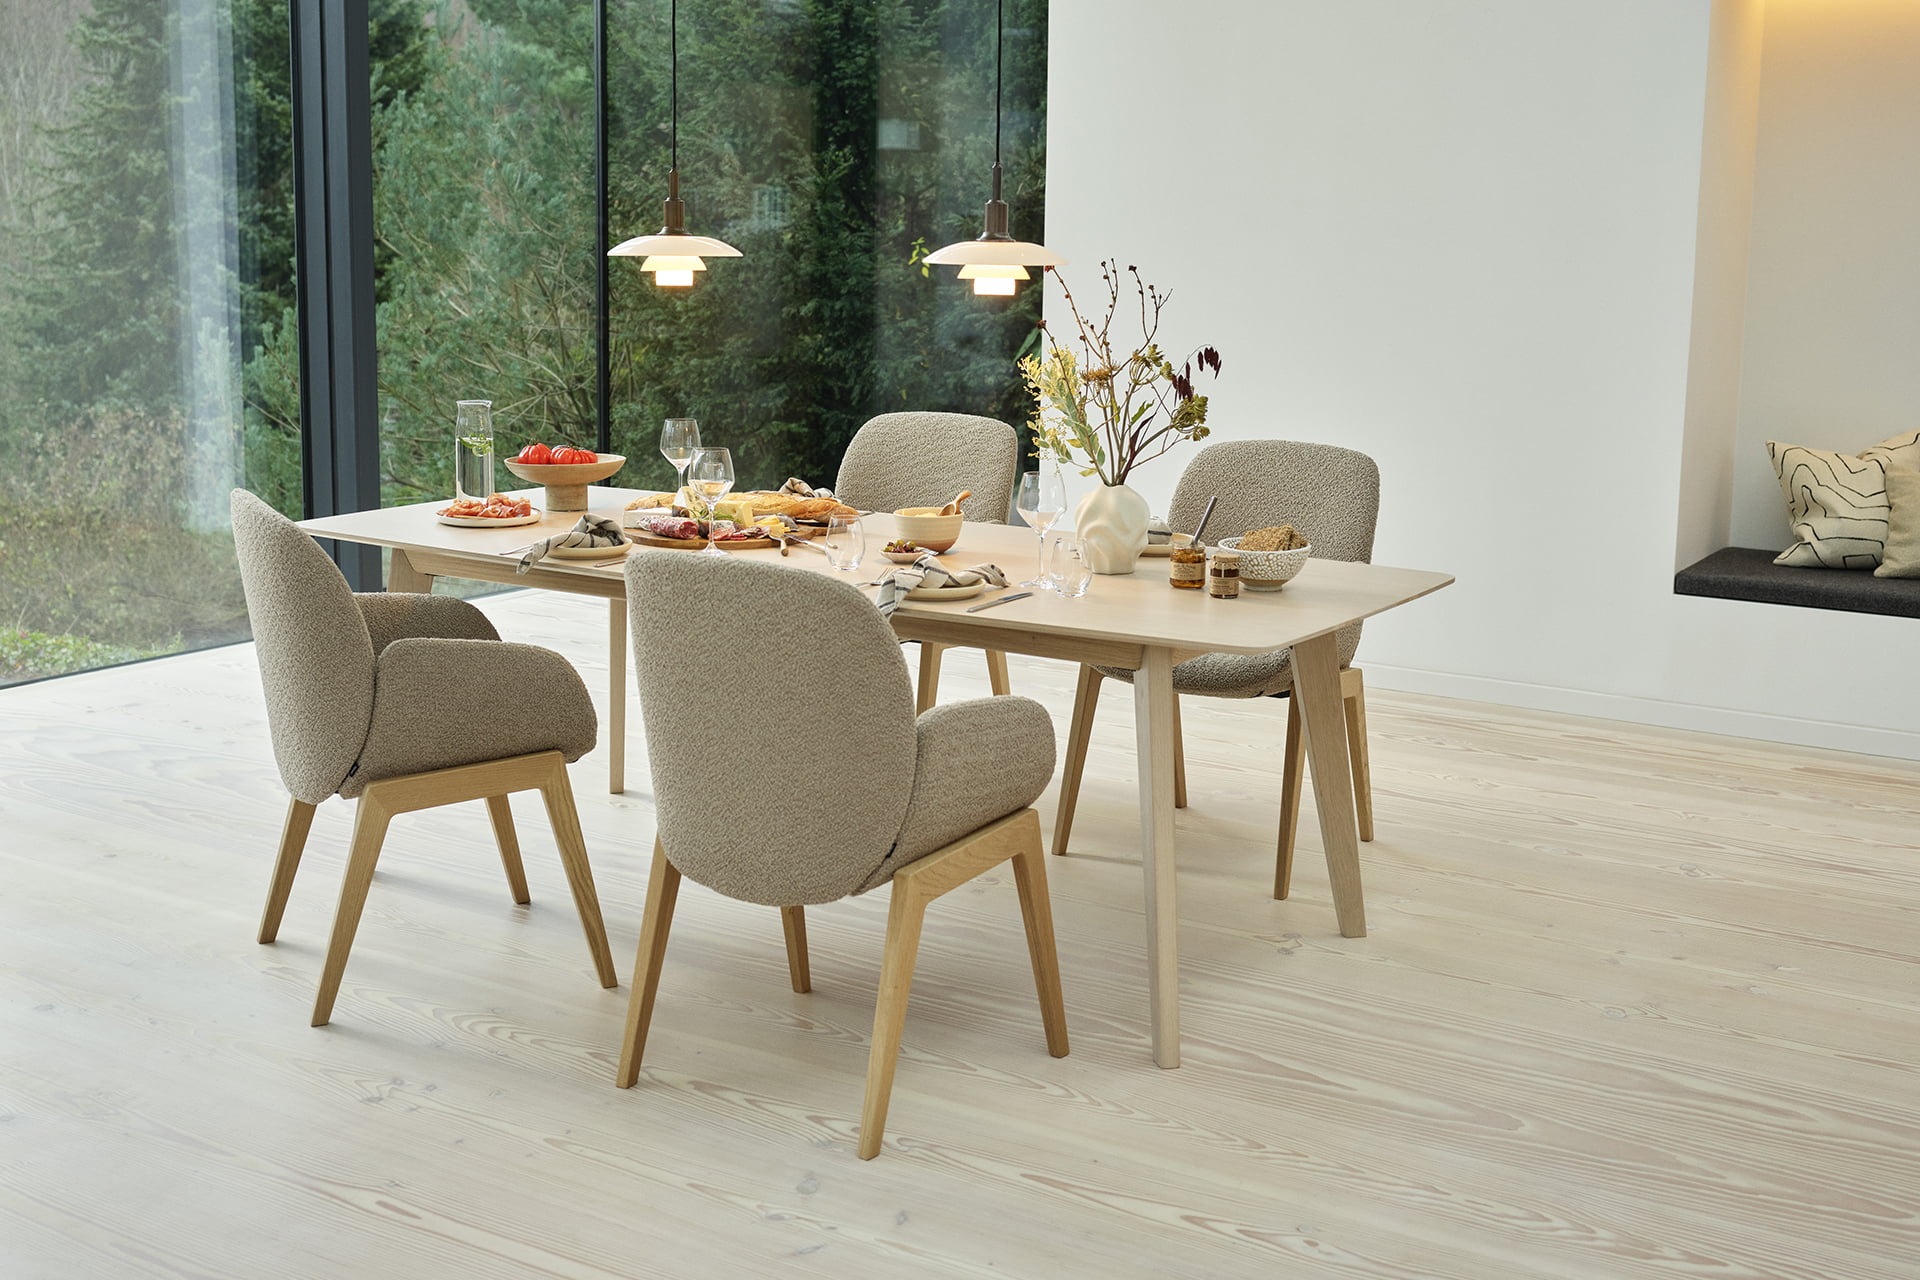 Stressless® Bay dining chairs and table in a modern house